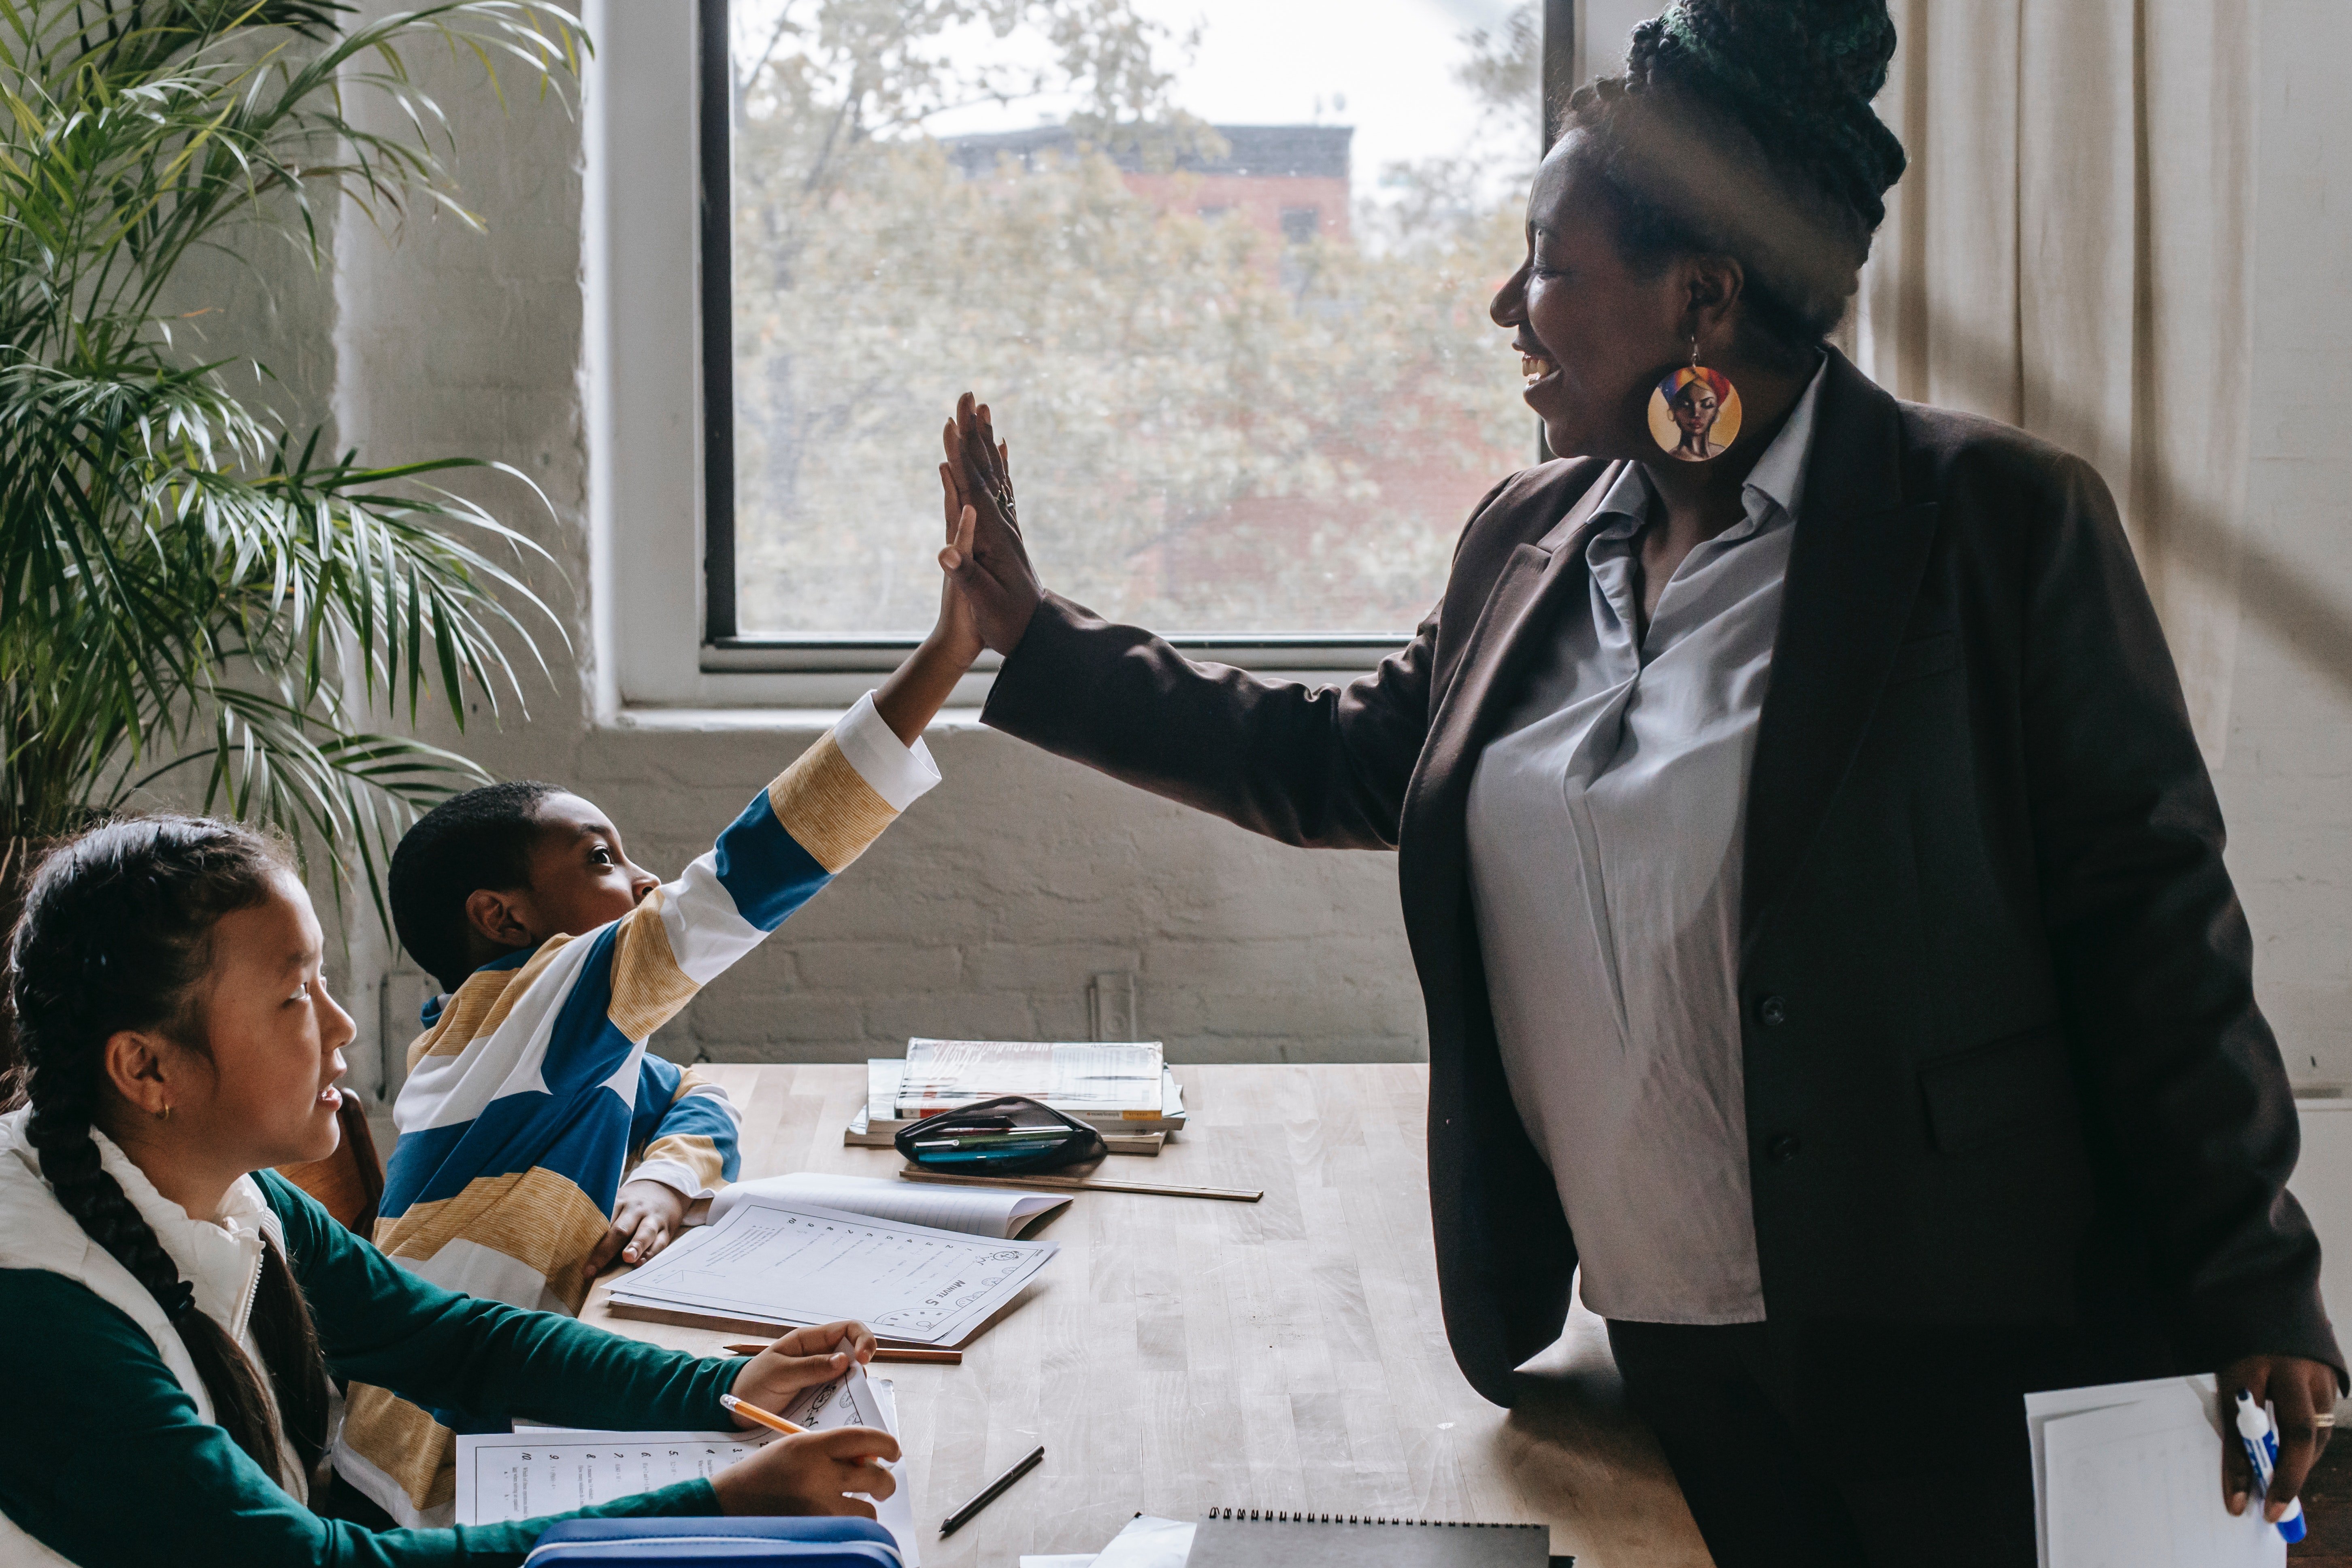 Pictured - A cheerful teacher giving a high five to one of her students in class | Source: Pexels 